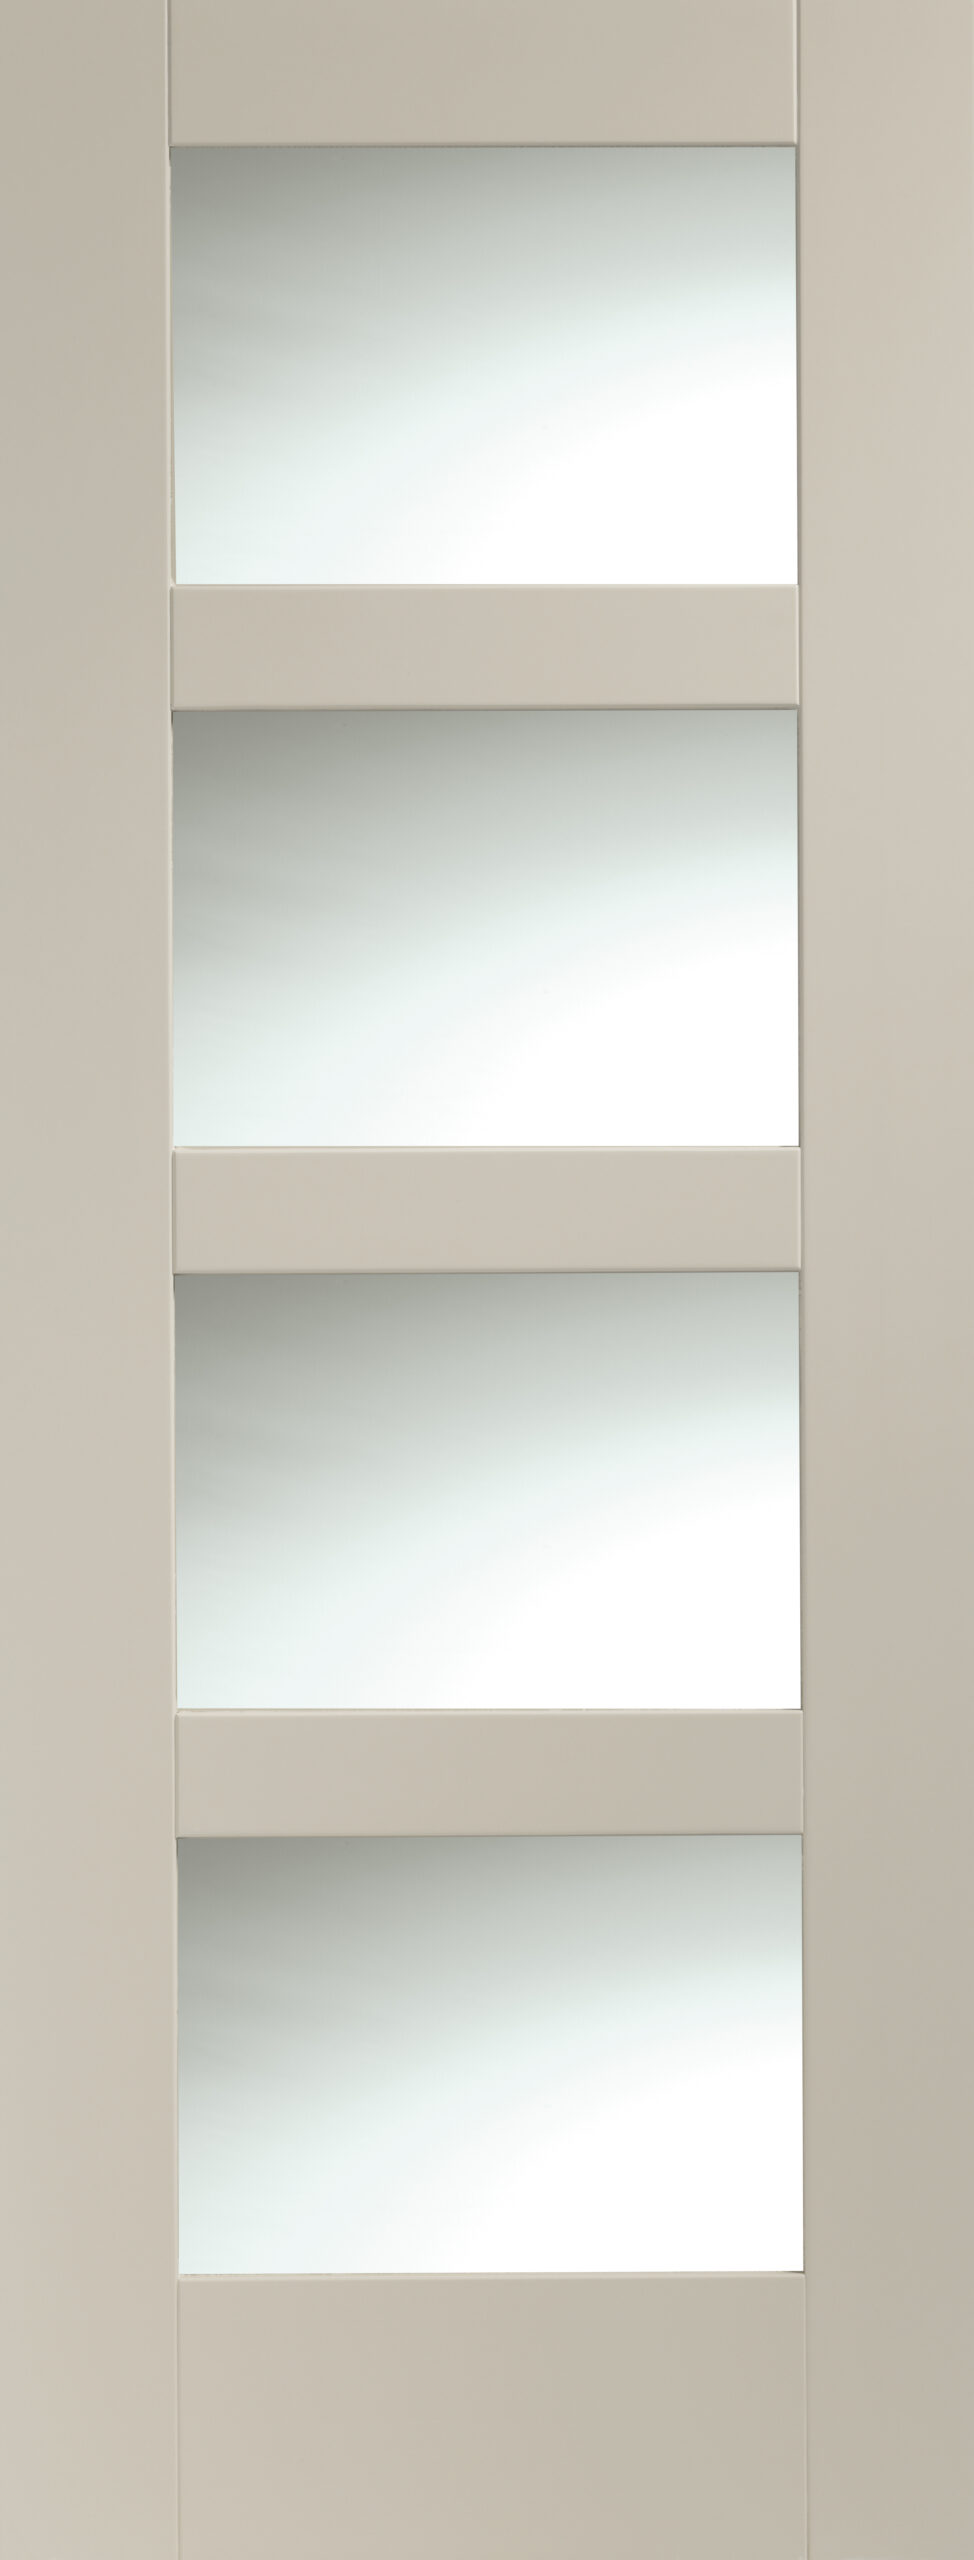 Shaker 4 Light Internal White Primed Fire Door with Clear Glass – 1981 x 686 x 44 mm, Isabella